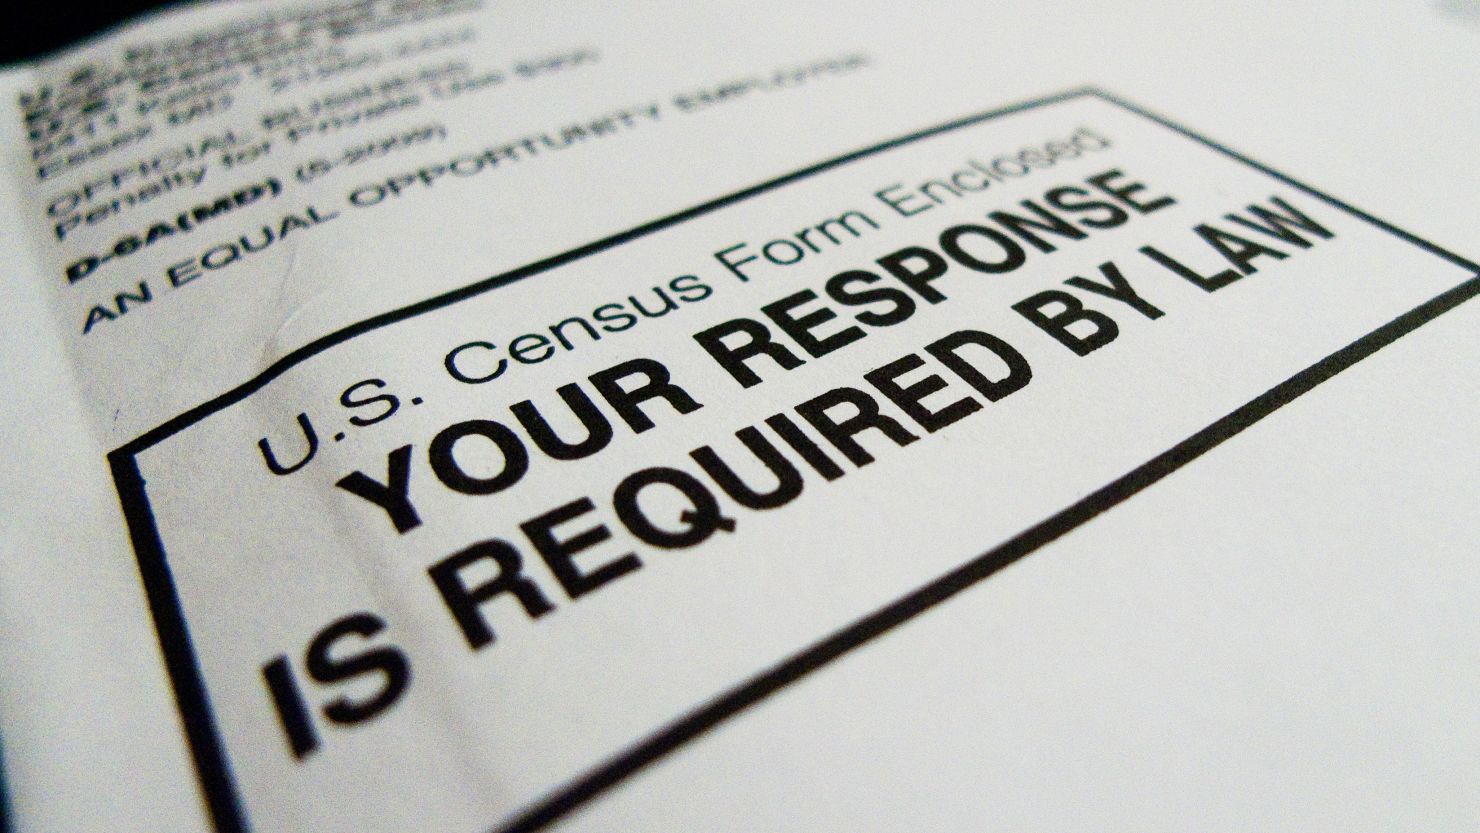 The official US Census form pictured on March 18, 2010 in Washington, DC. AFP PHOTO / Paul J. RICHARDS 